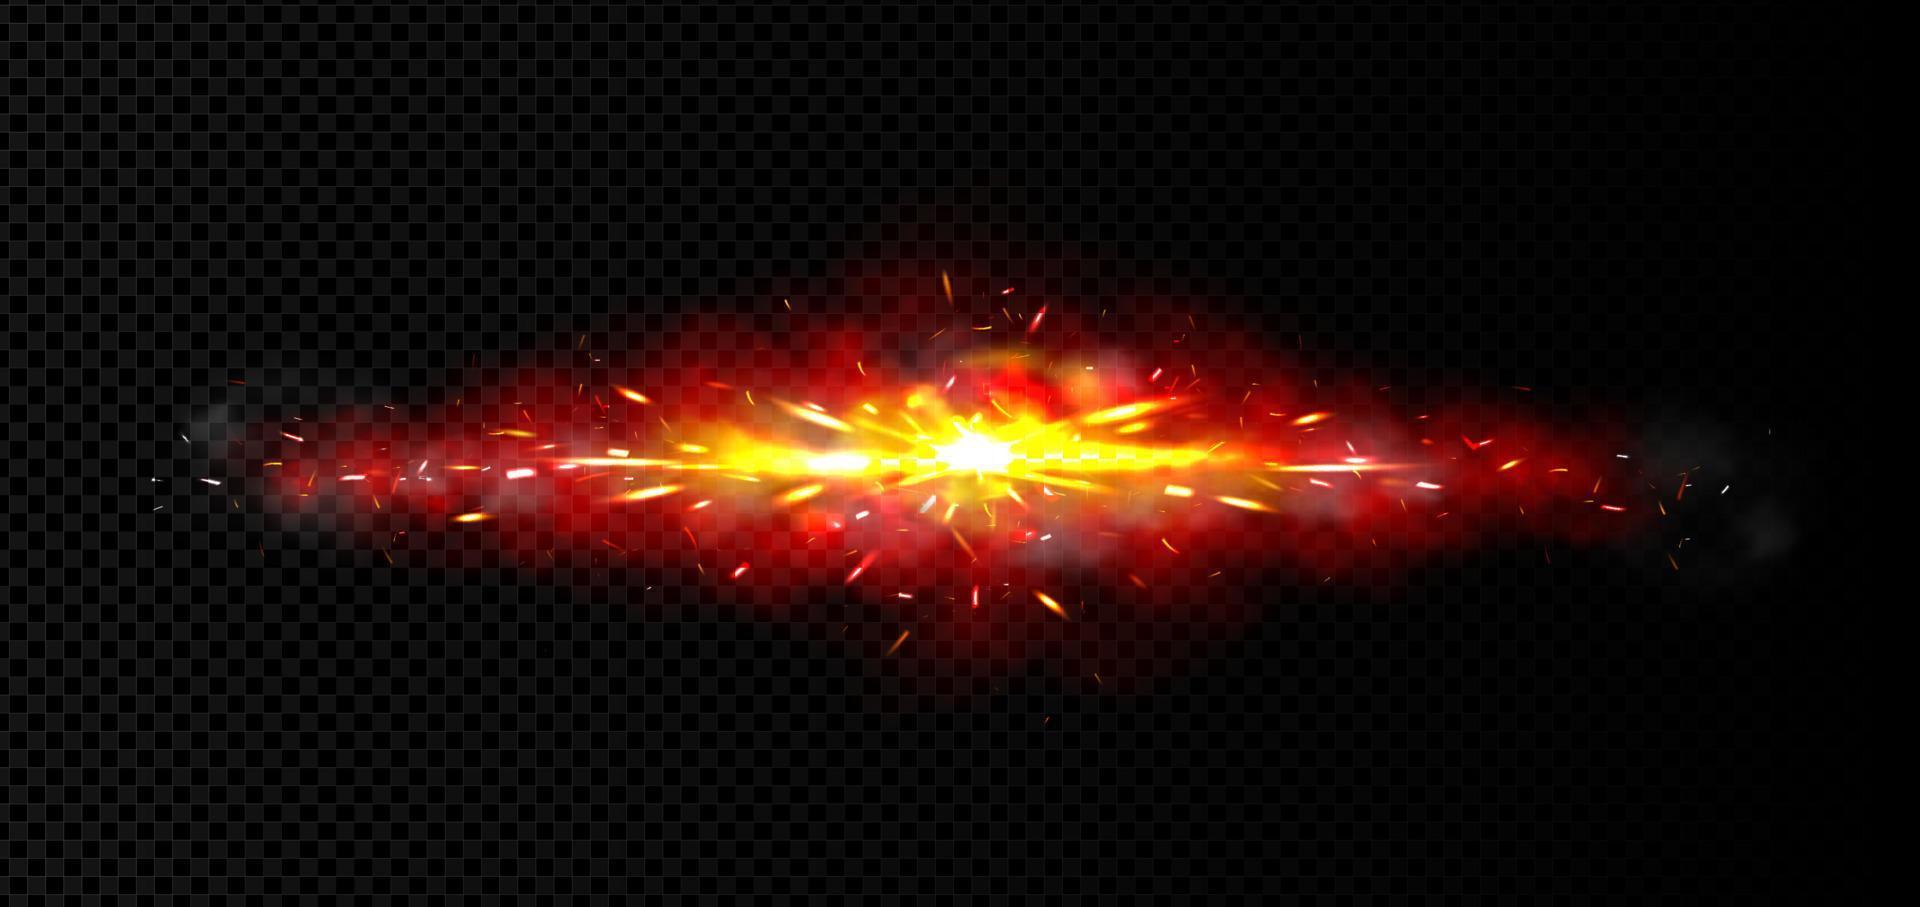 Explosion effect with fire, sparks and smoke vector